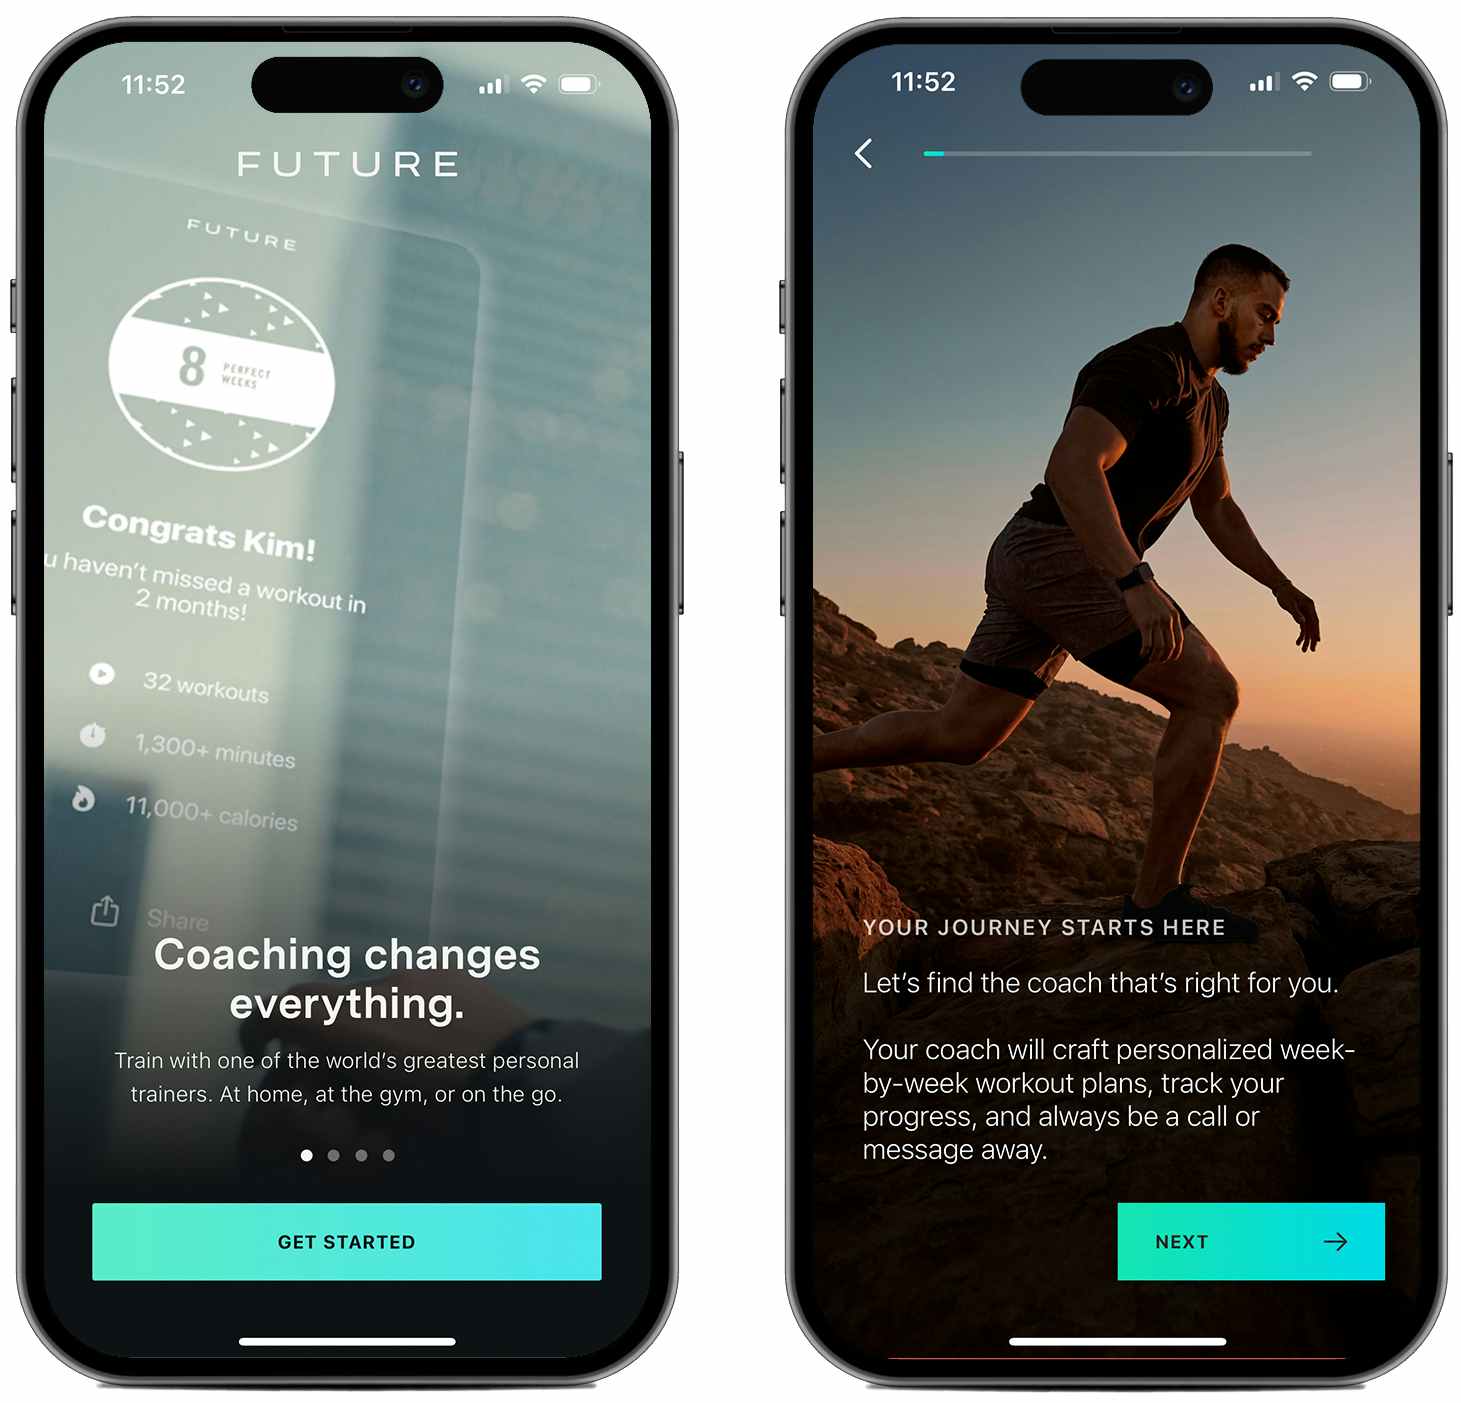 Screenshots from the Future fitness app on two iPhone screens